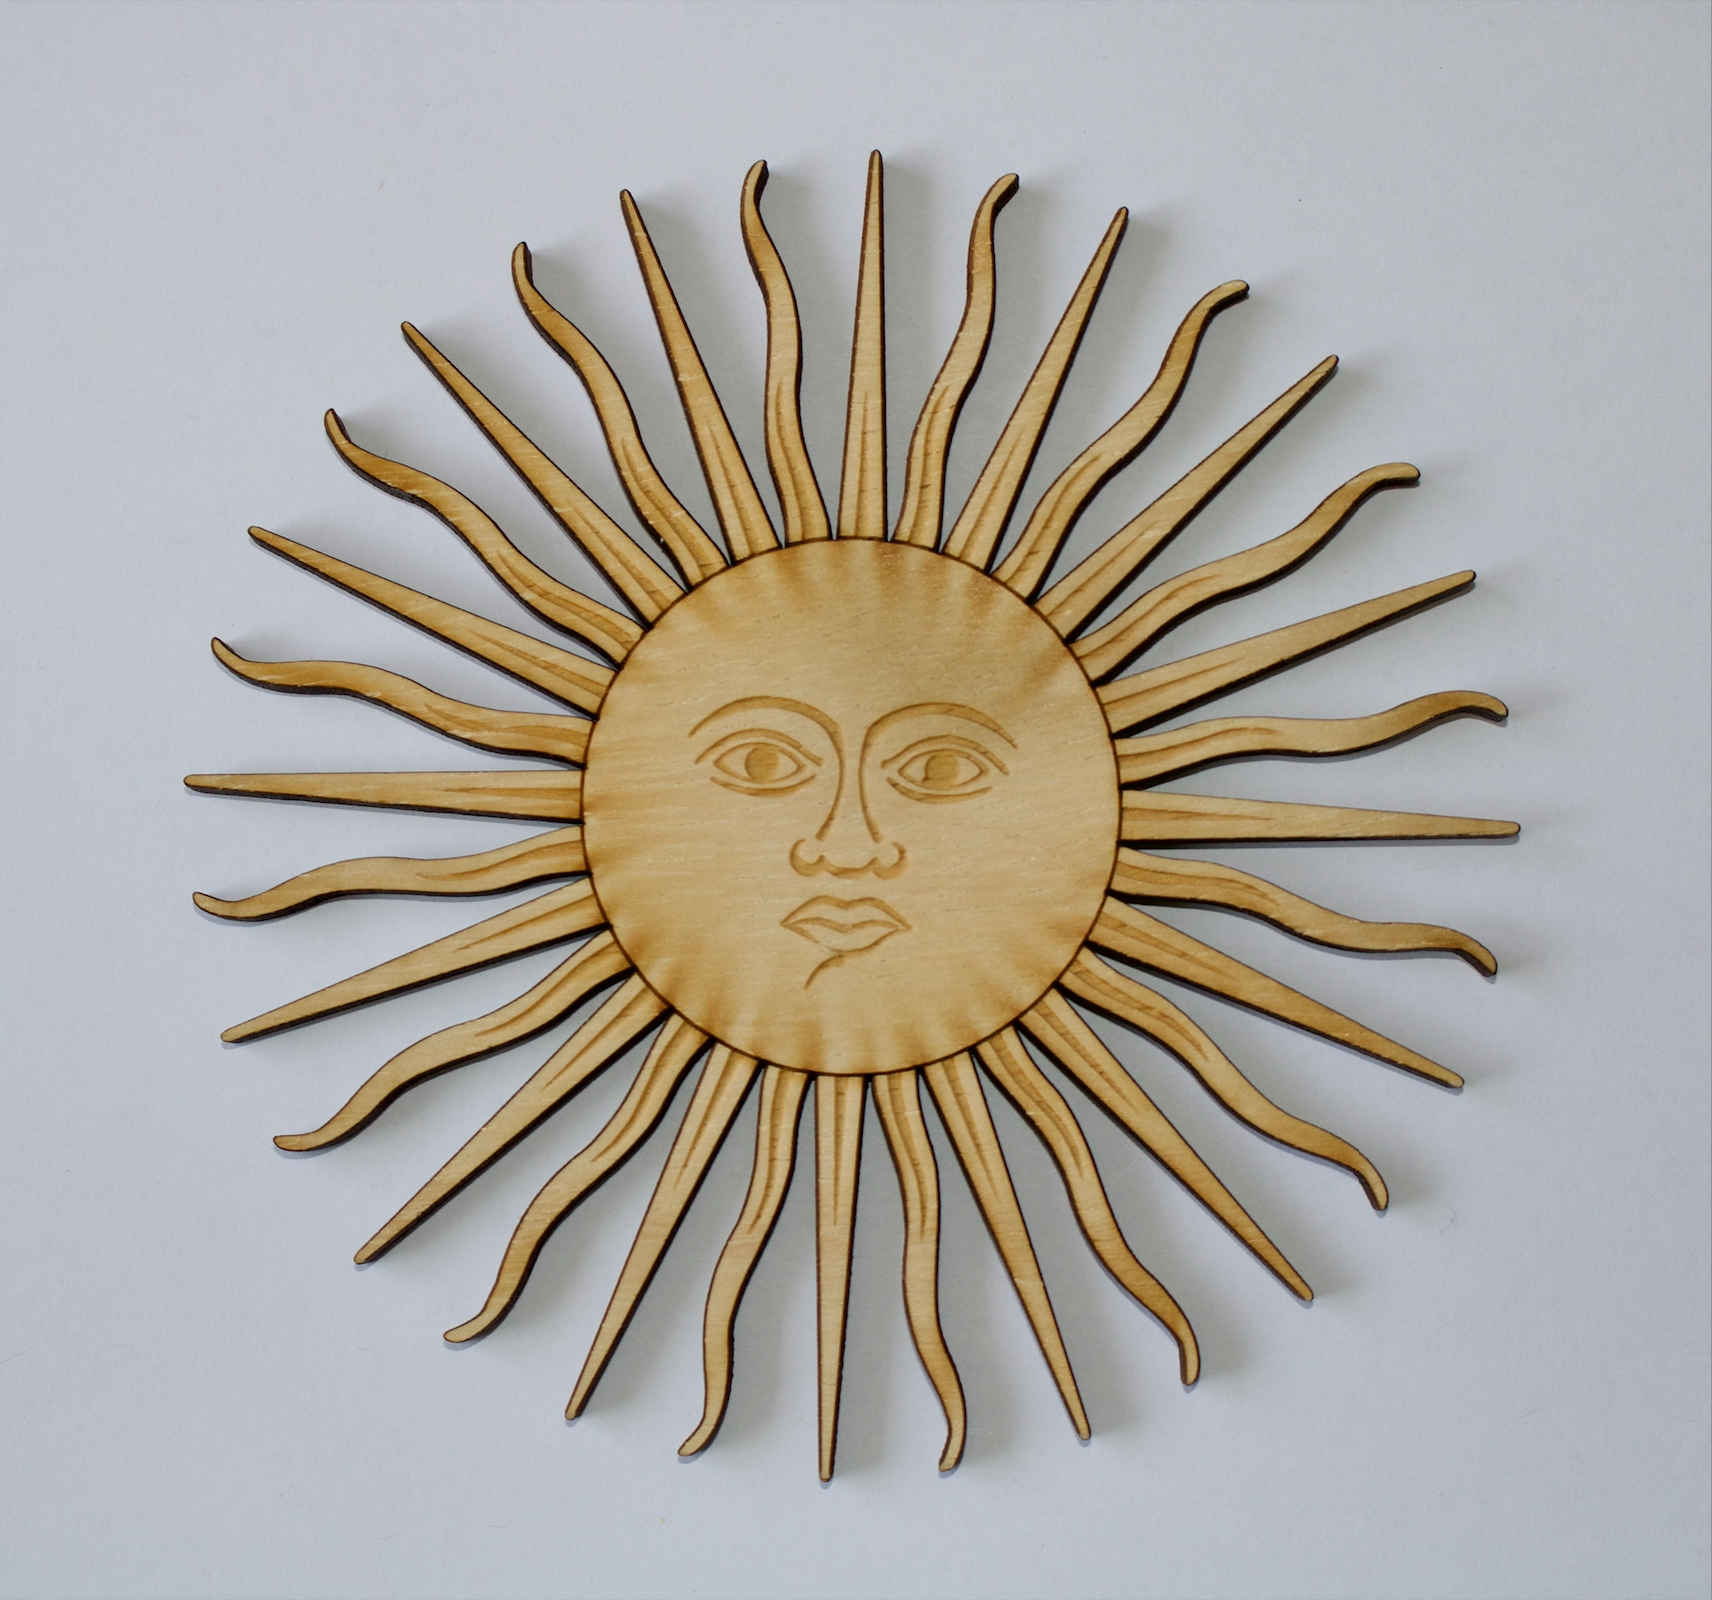 A sun printed with laser on wood.